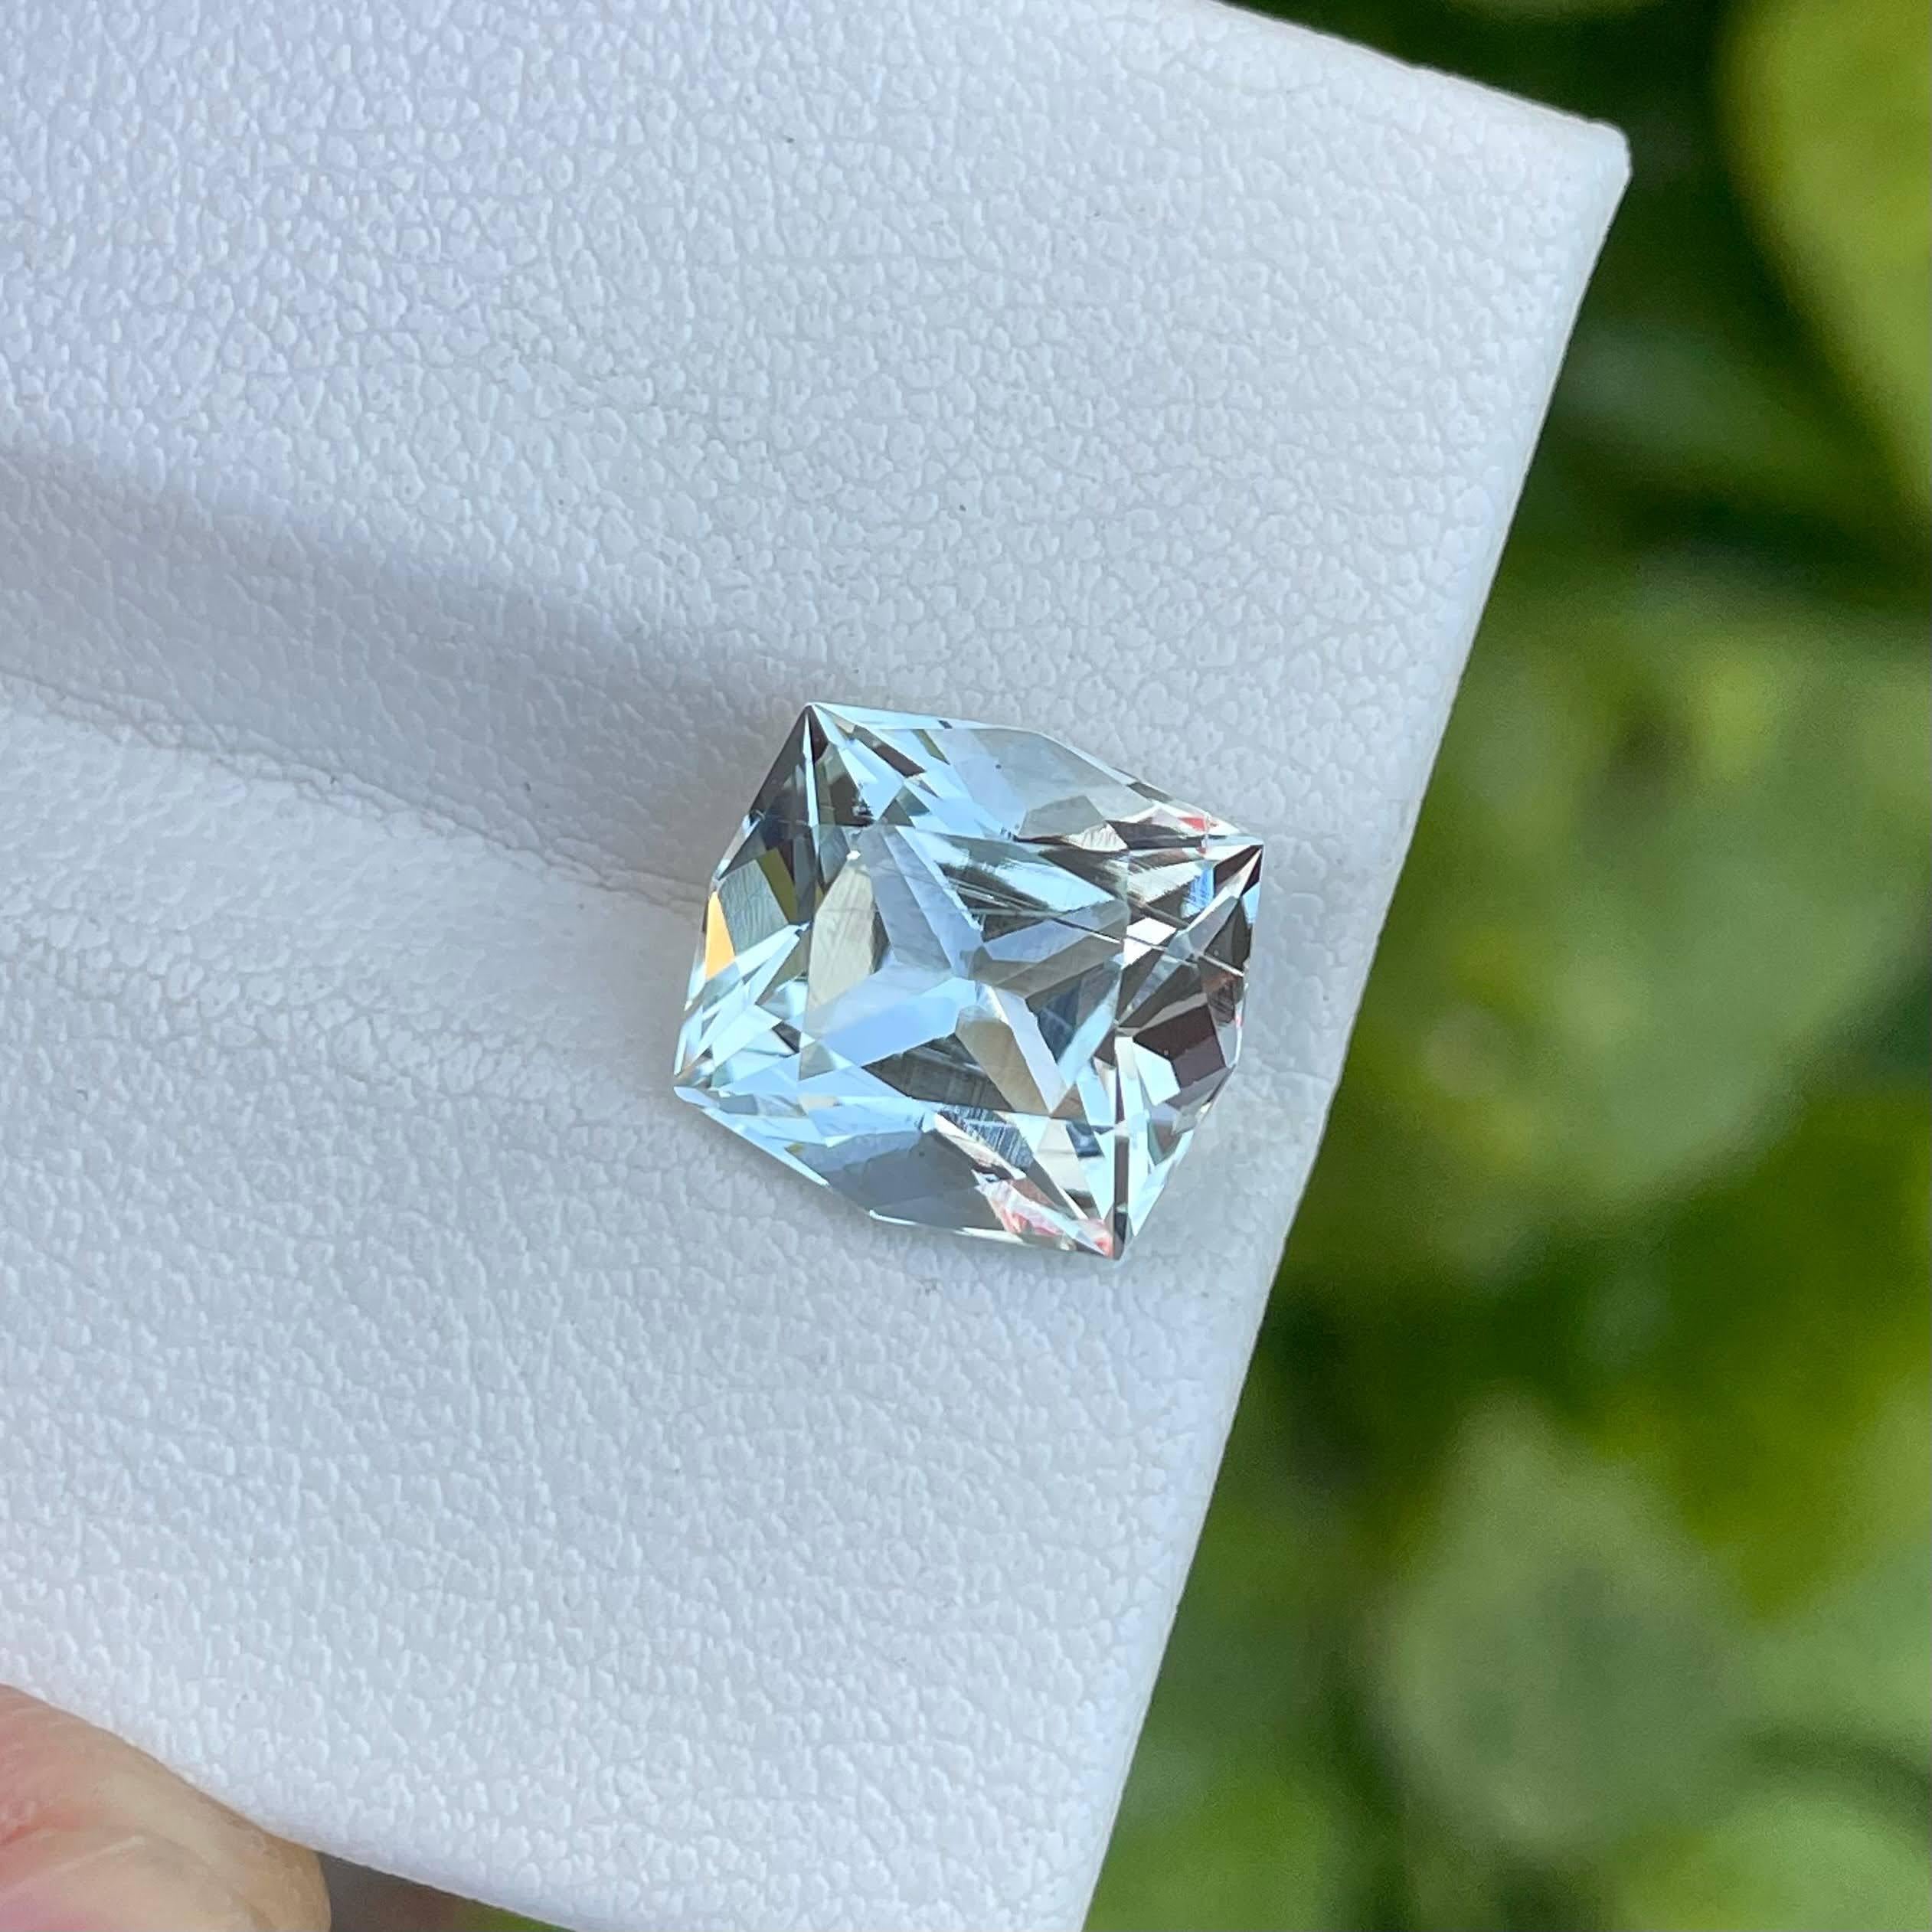 Weight 5.20 carats 
Dimensions 11.2x10.3x7.9 mm
Treatment none 
Origin Pakistan 
Clarity SI
Shape cushion 
Cut custom precision 




Crafted with meticulous precision, this stunning 5.20 carats Aquamarine gemstone embodies the ethereal beauty of the